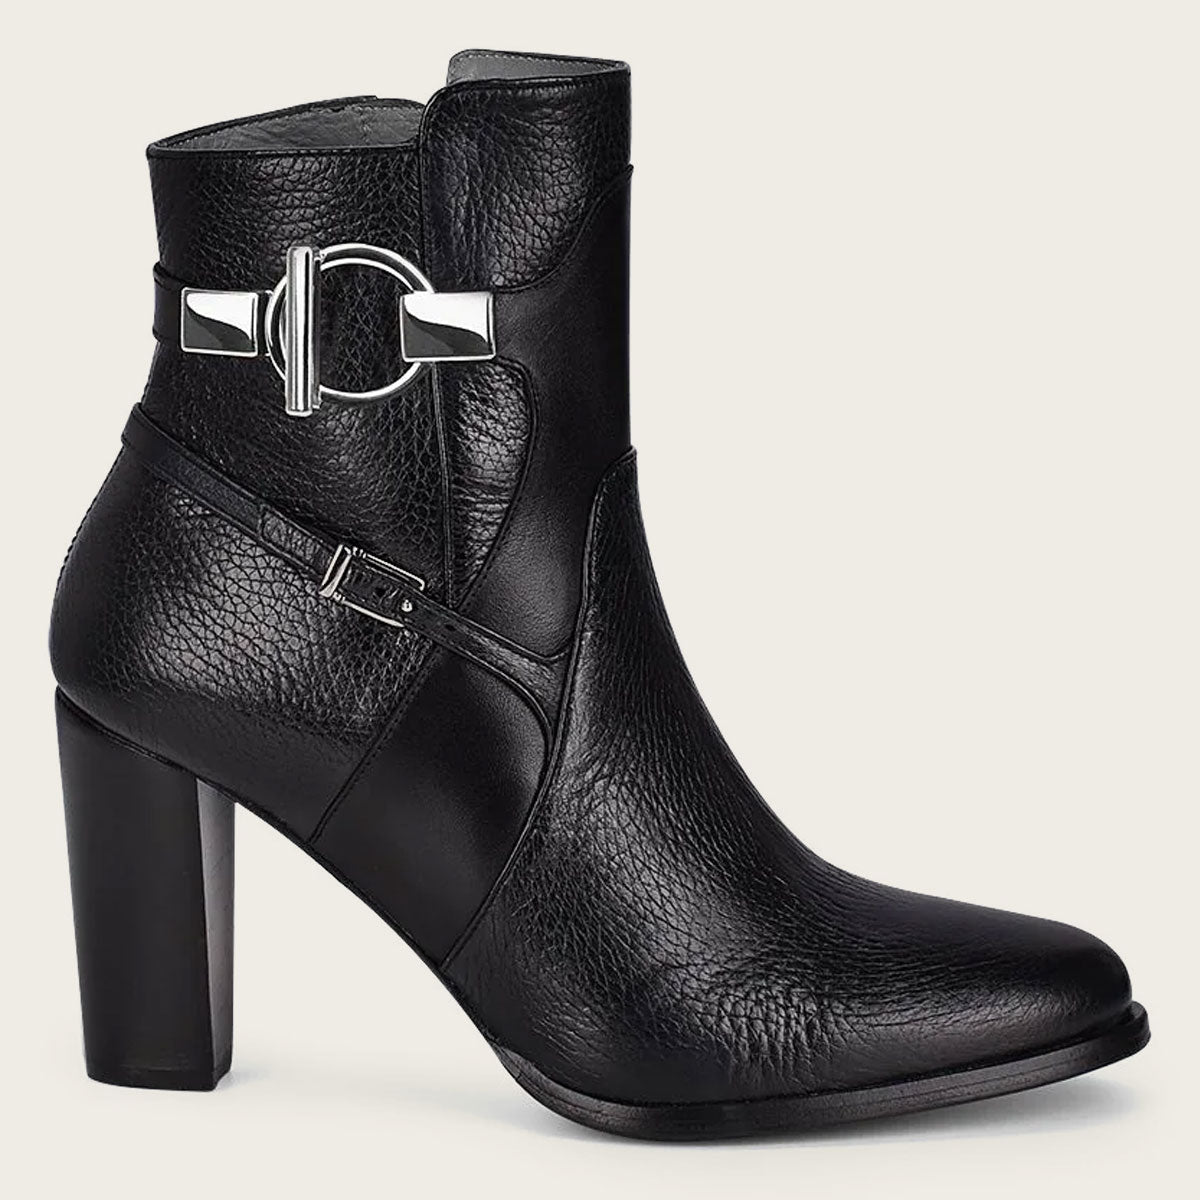 Black leather bootie made with genuine deer leather, featuring a sleek and stylish design.